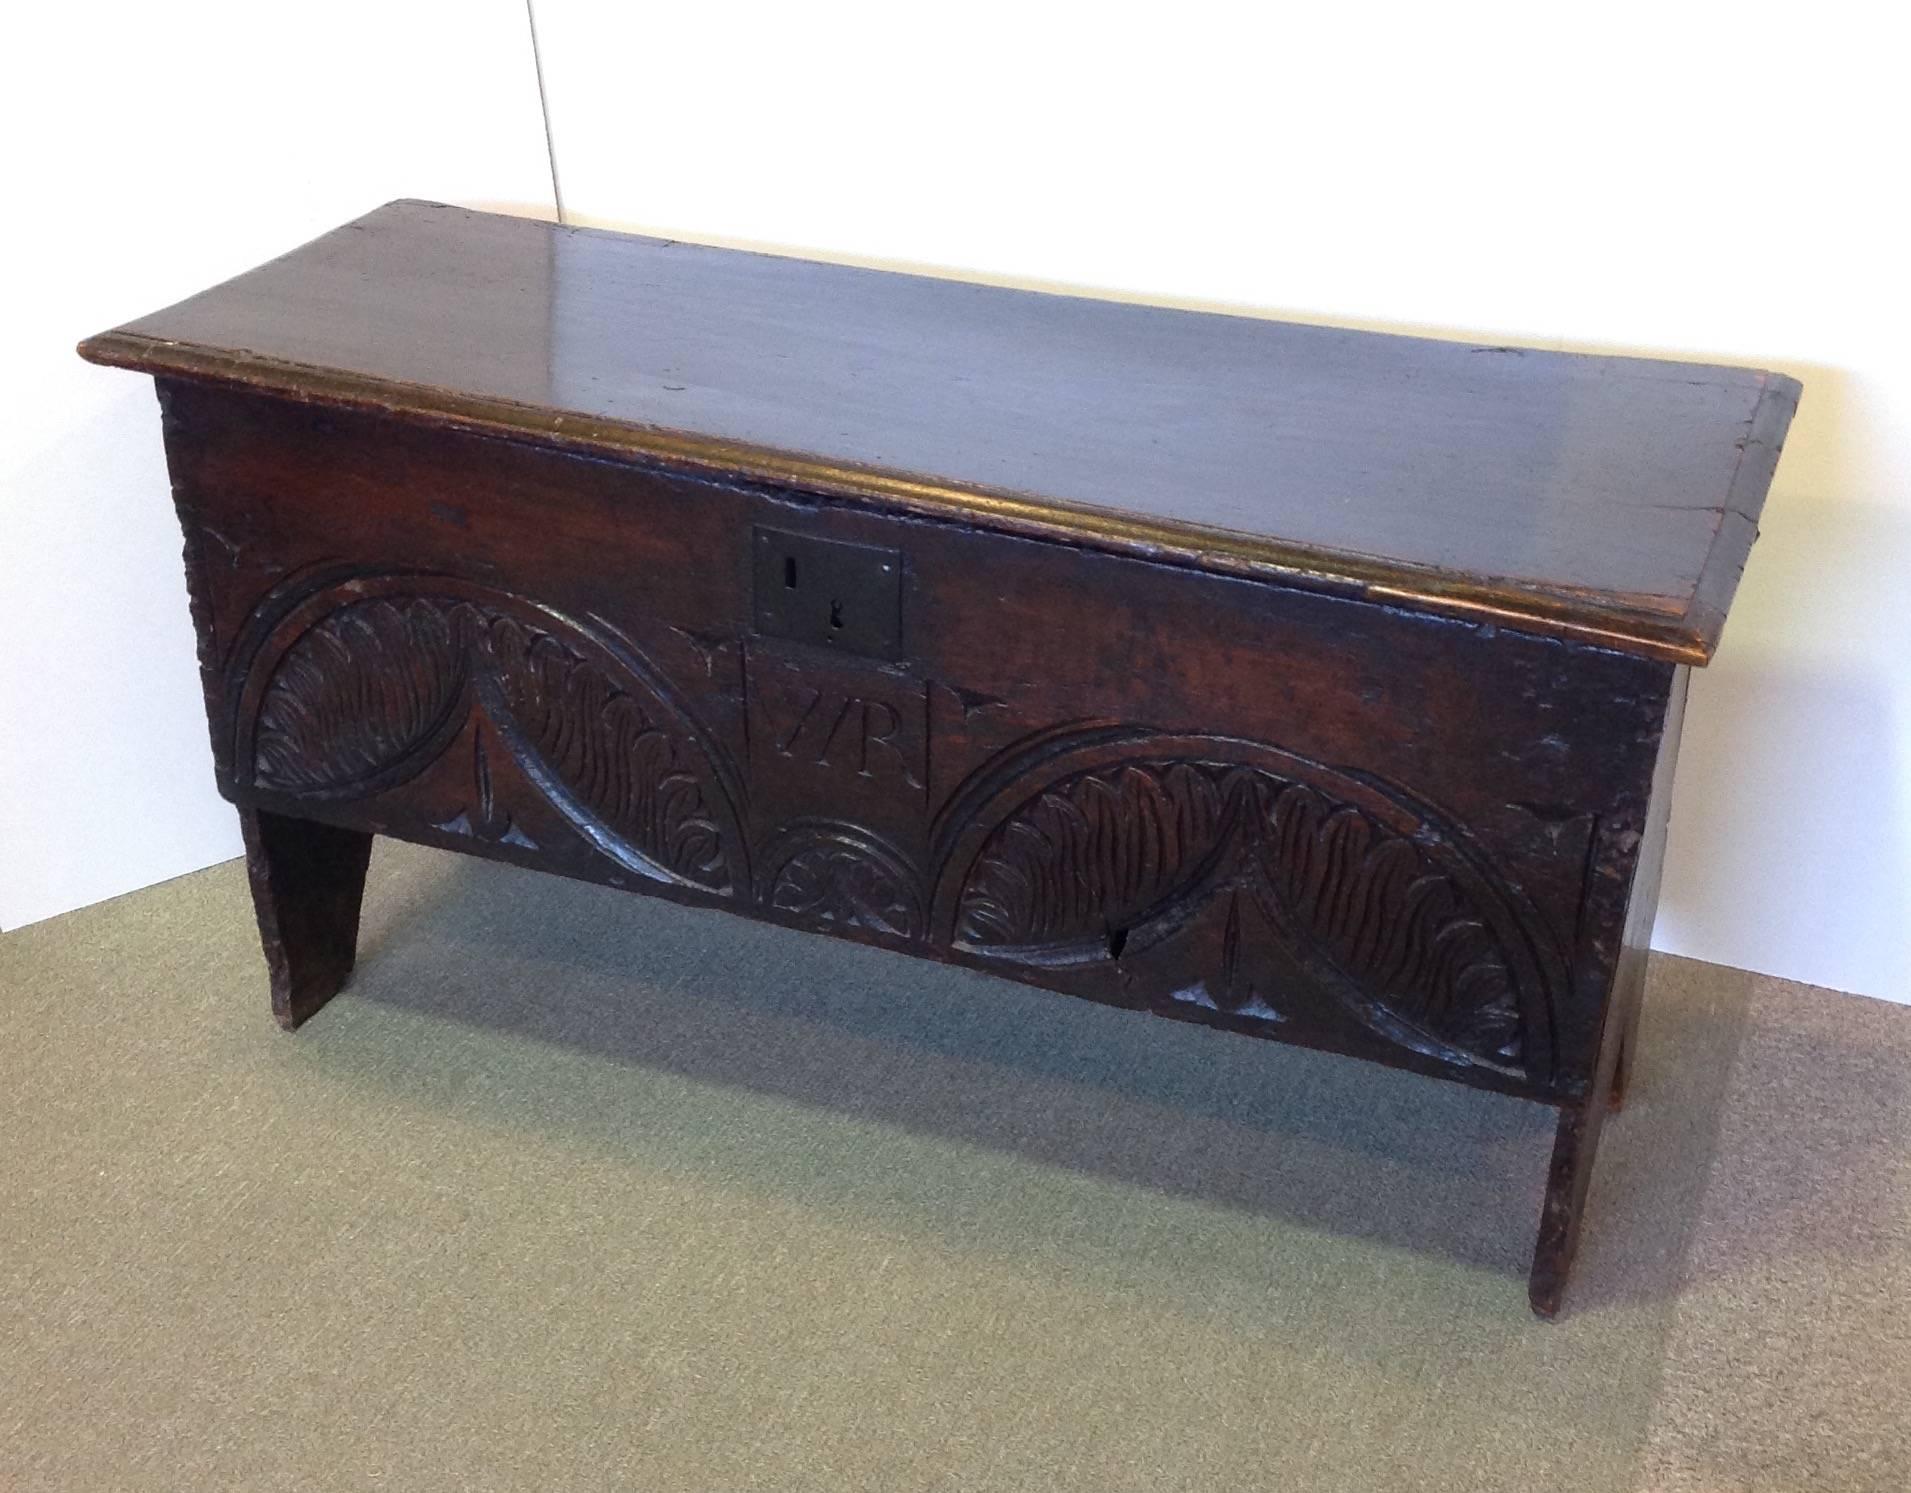 Antique English Carved Wooden Blanket Chest, 17th Century In Good Condition For Sale In Houston, TX